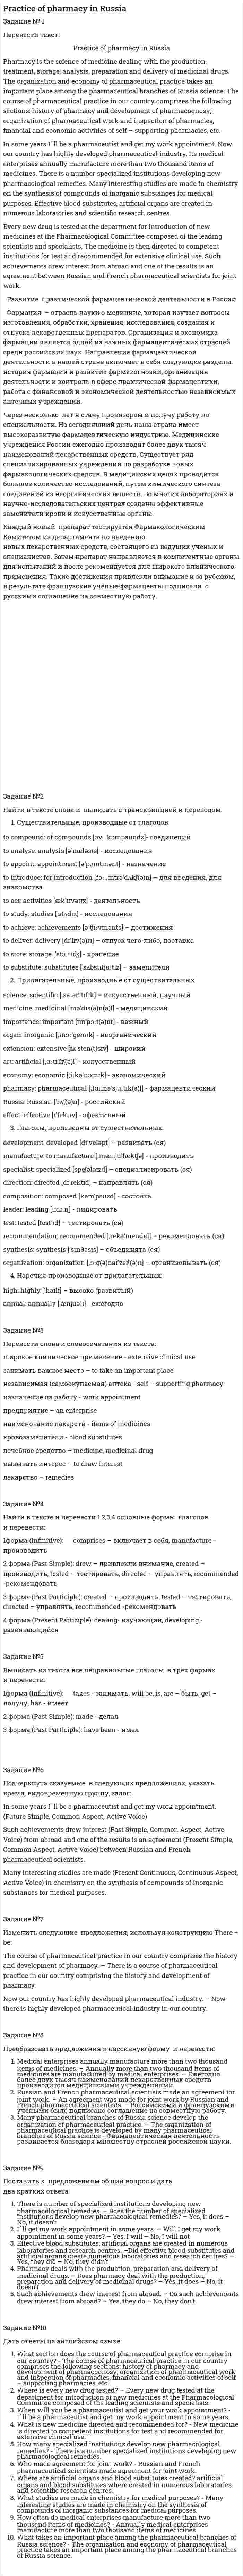 Practice of pharmacy in Russia